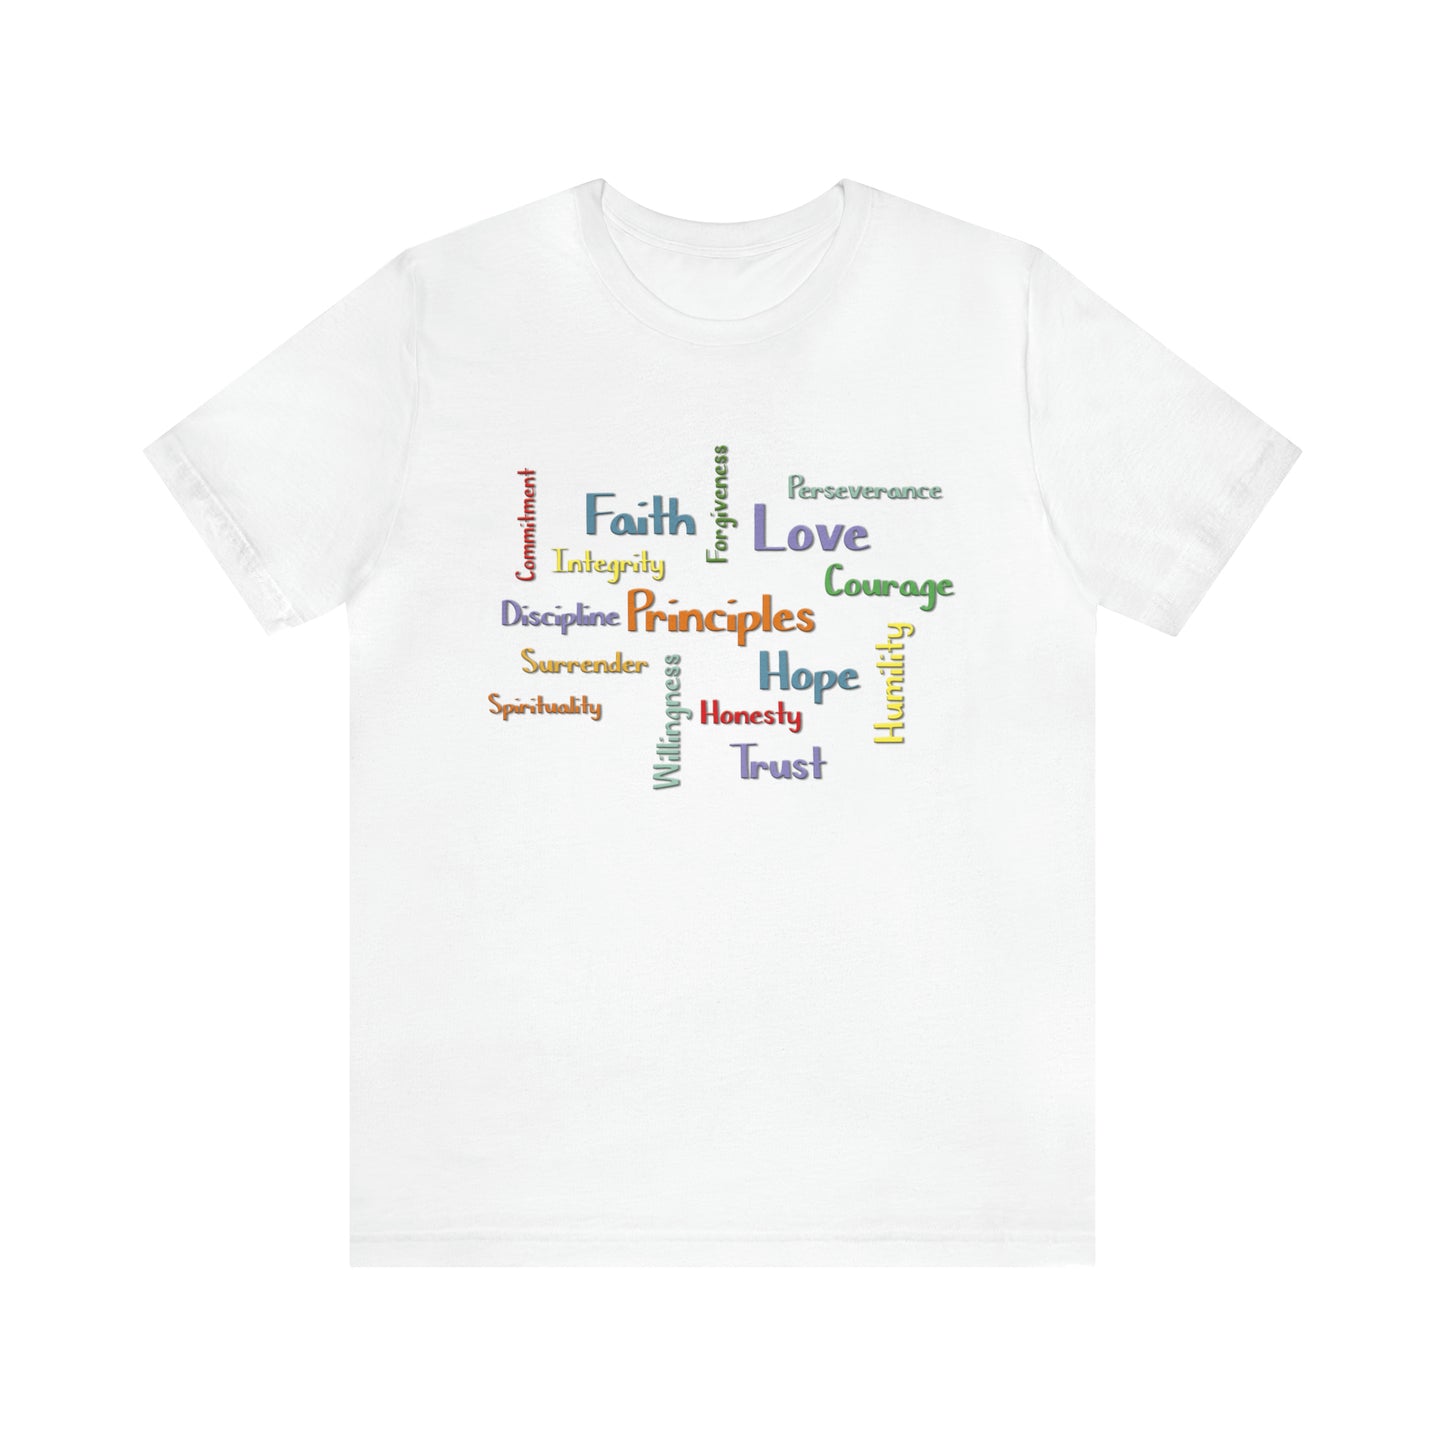 Graphic Tee, Graphic T-shirt, Spiritual Principles of Recovery, Word Cloud Design, Gift for Recovery or Sober Anniversary